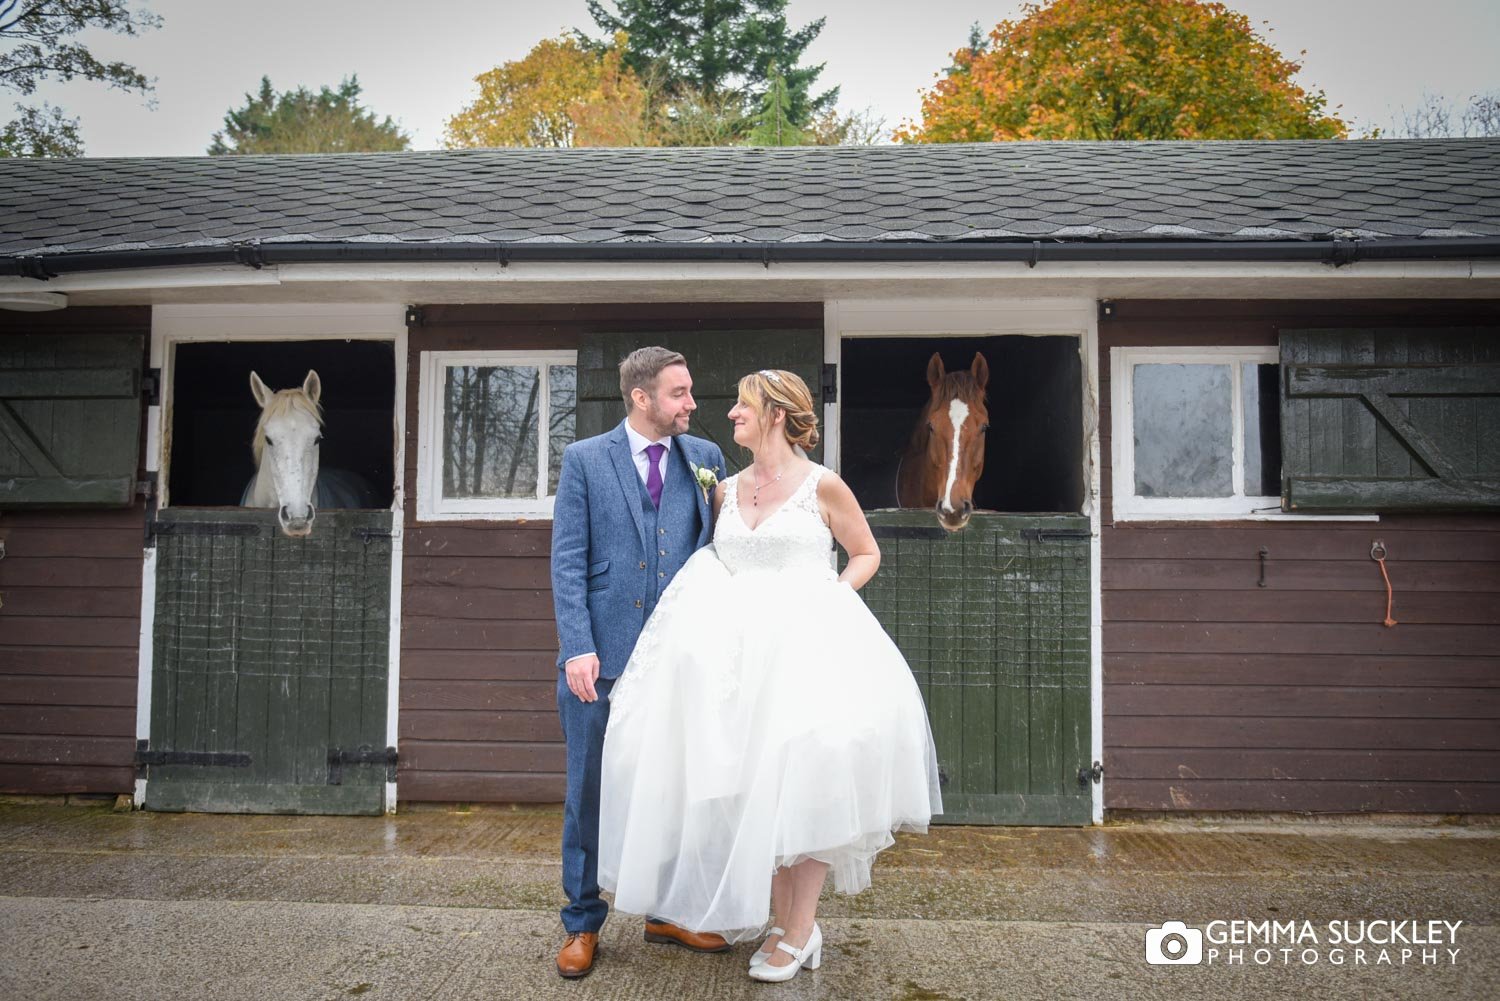 the bride and groom at the stables at hotel hotel estate